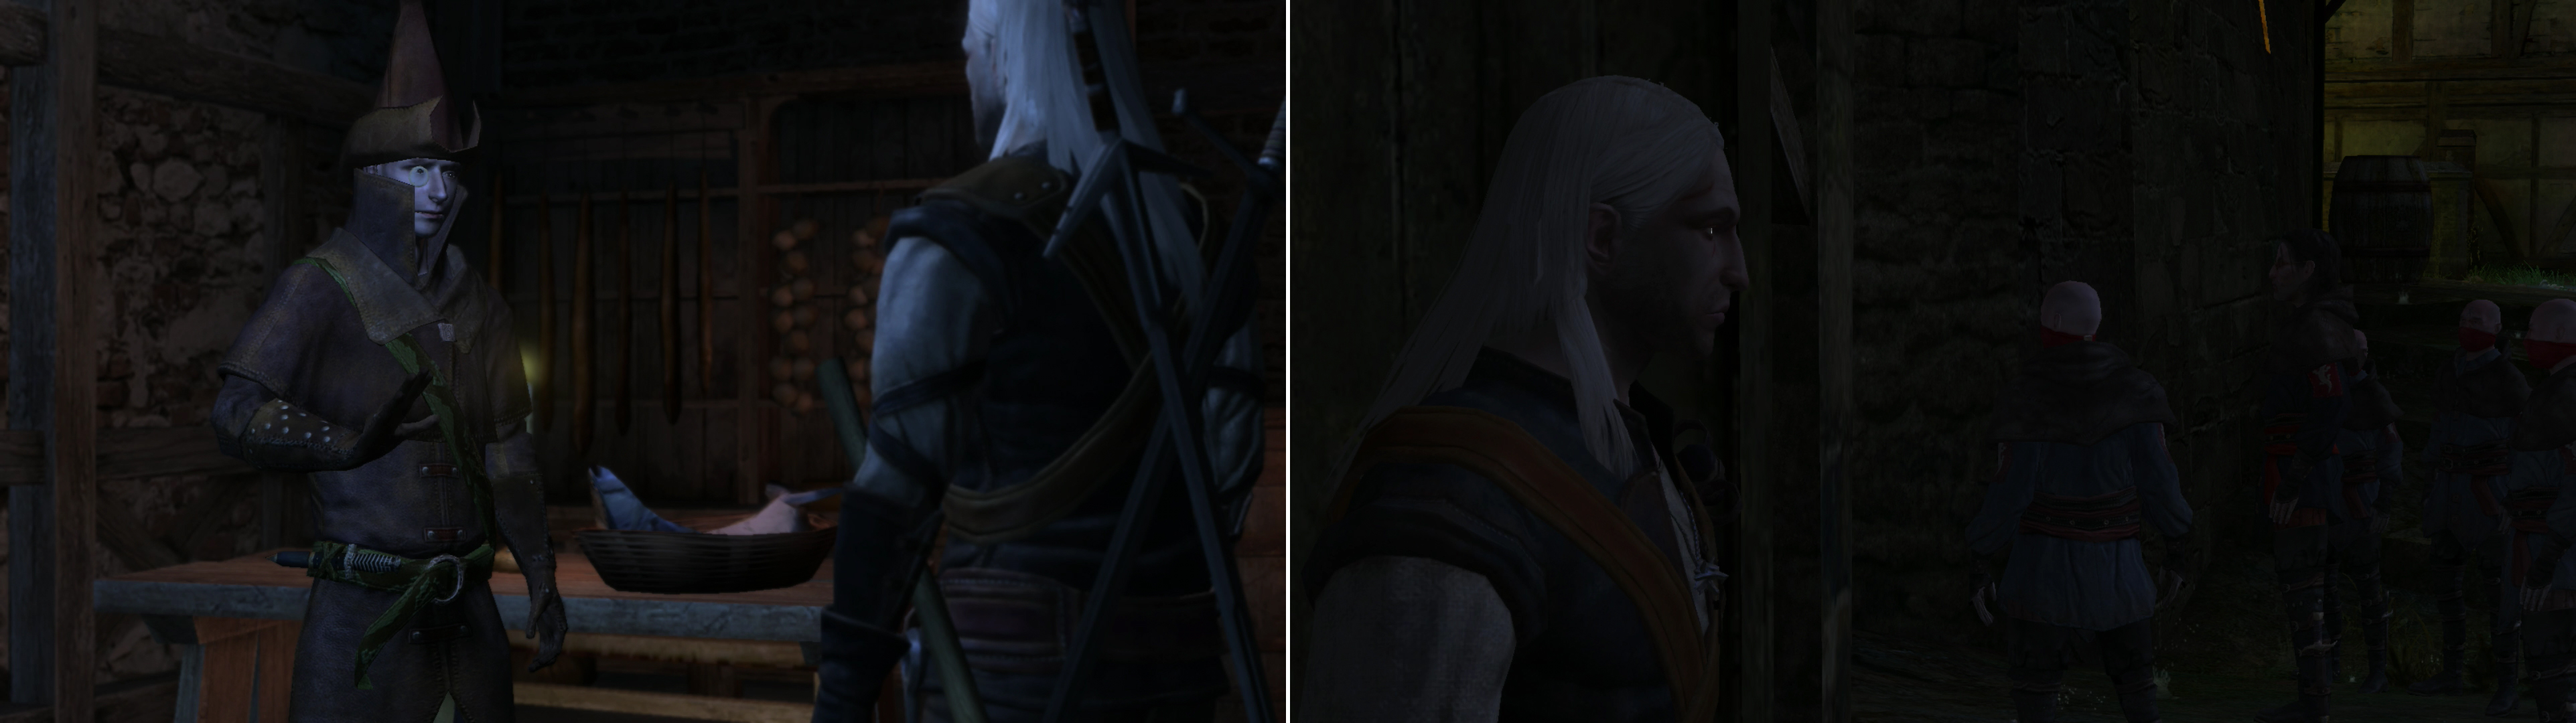 Go meet with Raymond-the detective, who is an eager ally in the fight against Salamandra (left). Geralt plays the waiting game so he can get the drop on some Salamanders who followed him (right).